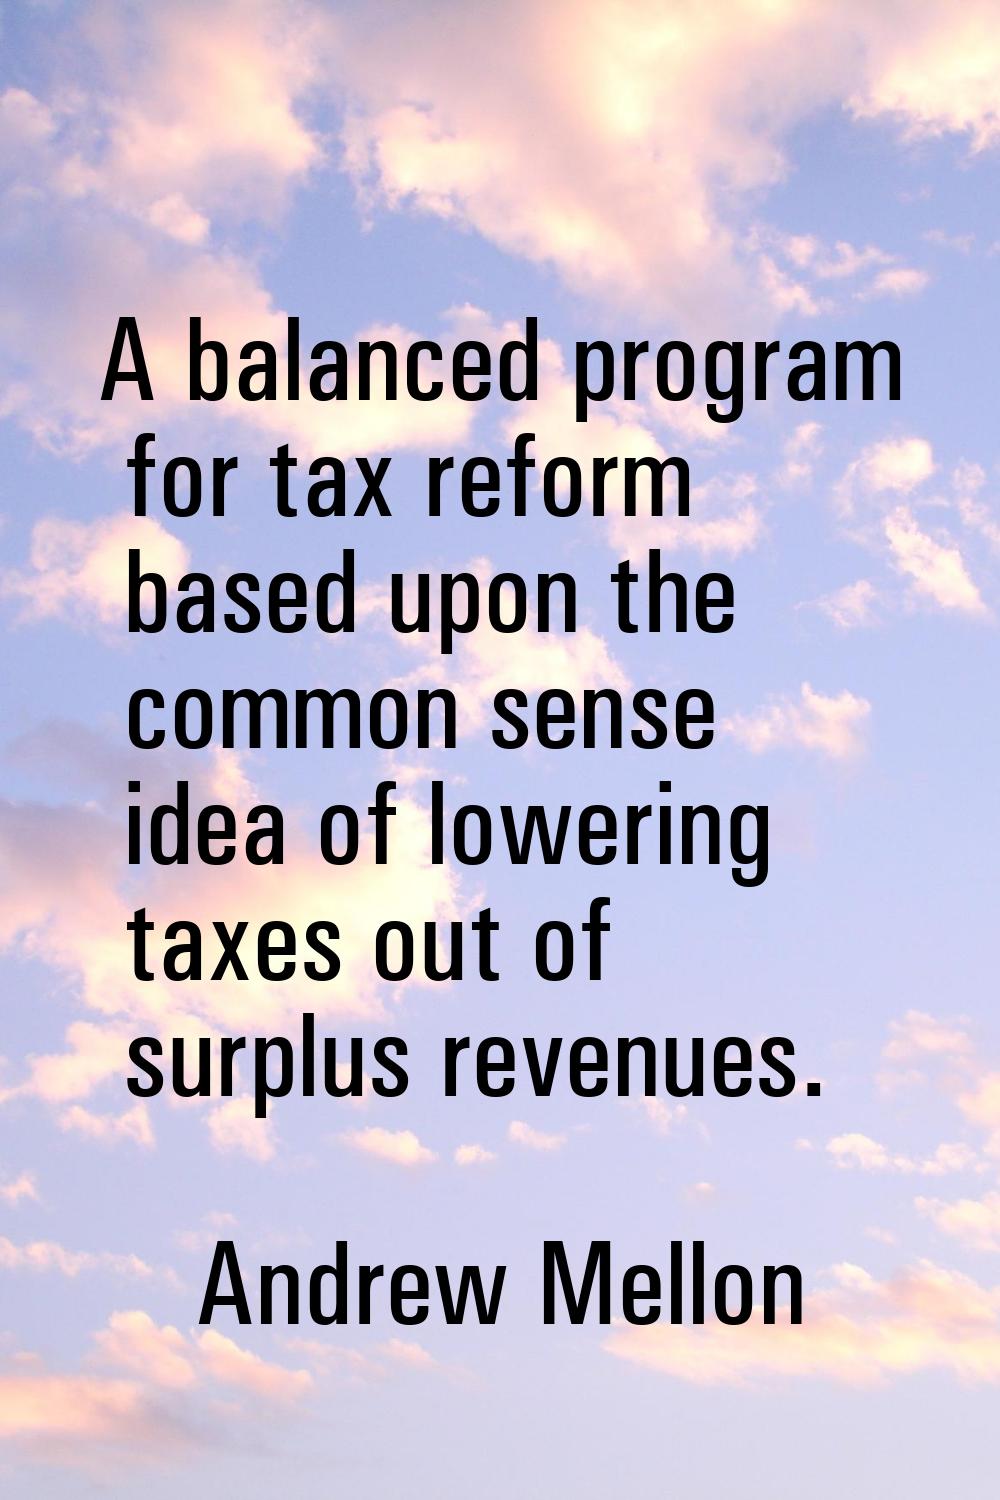 A balanced program for tax reform based upon the common sense idea of lowering taxes out of surplus